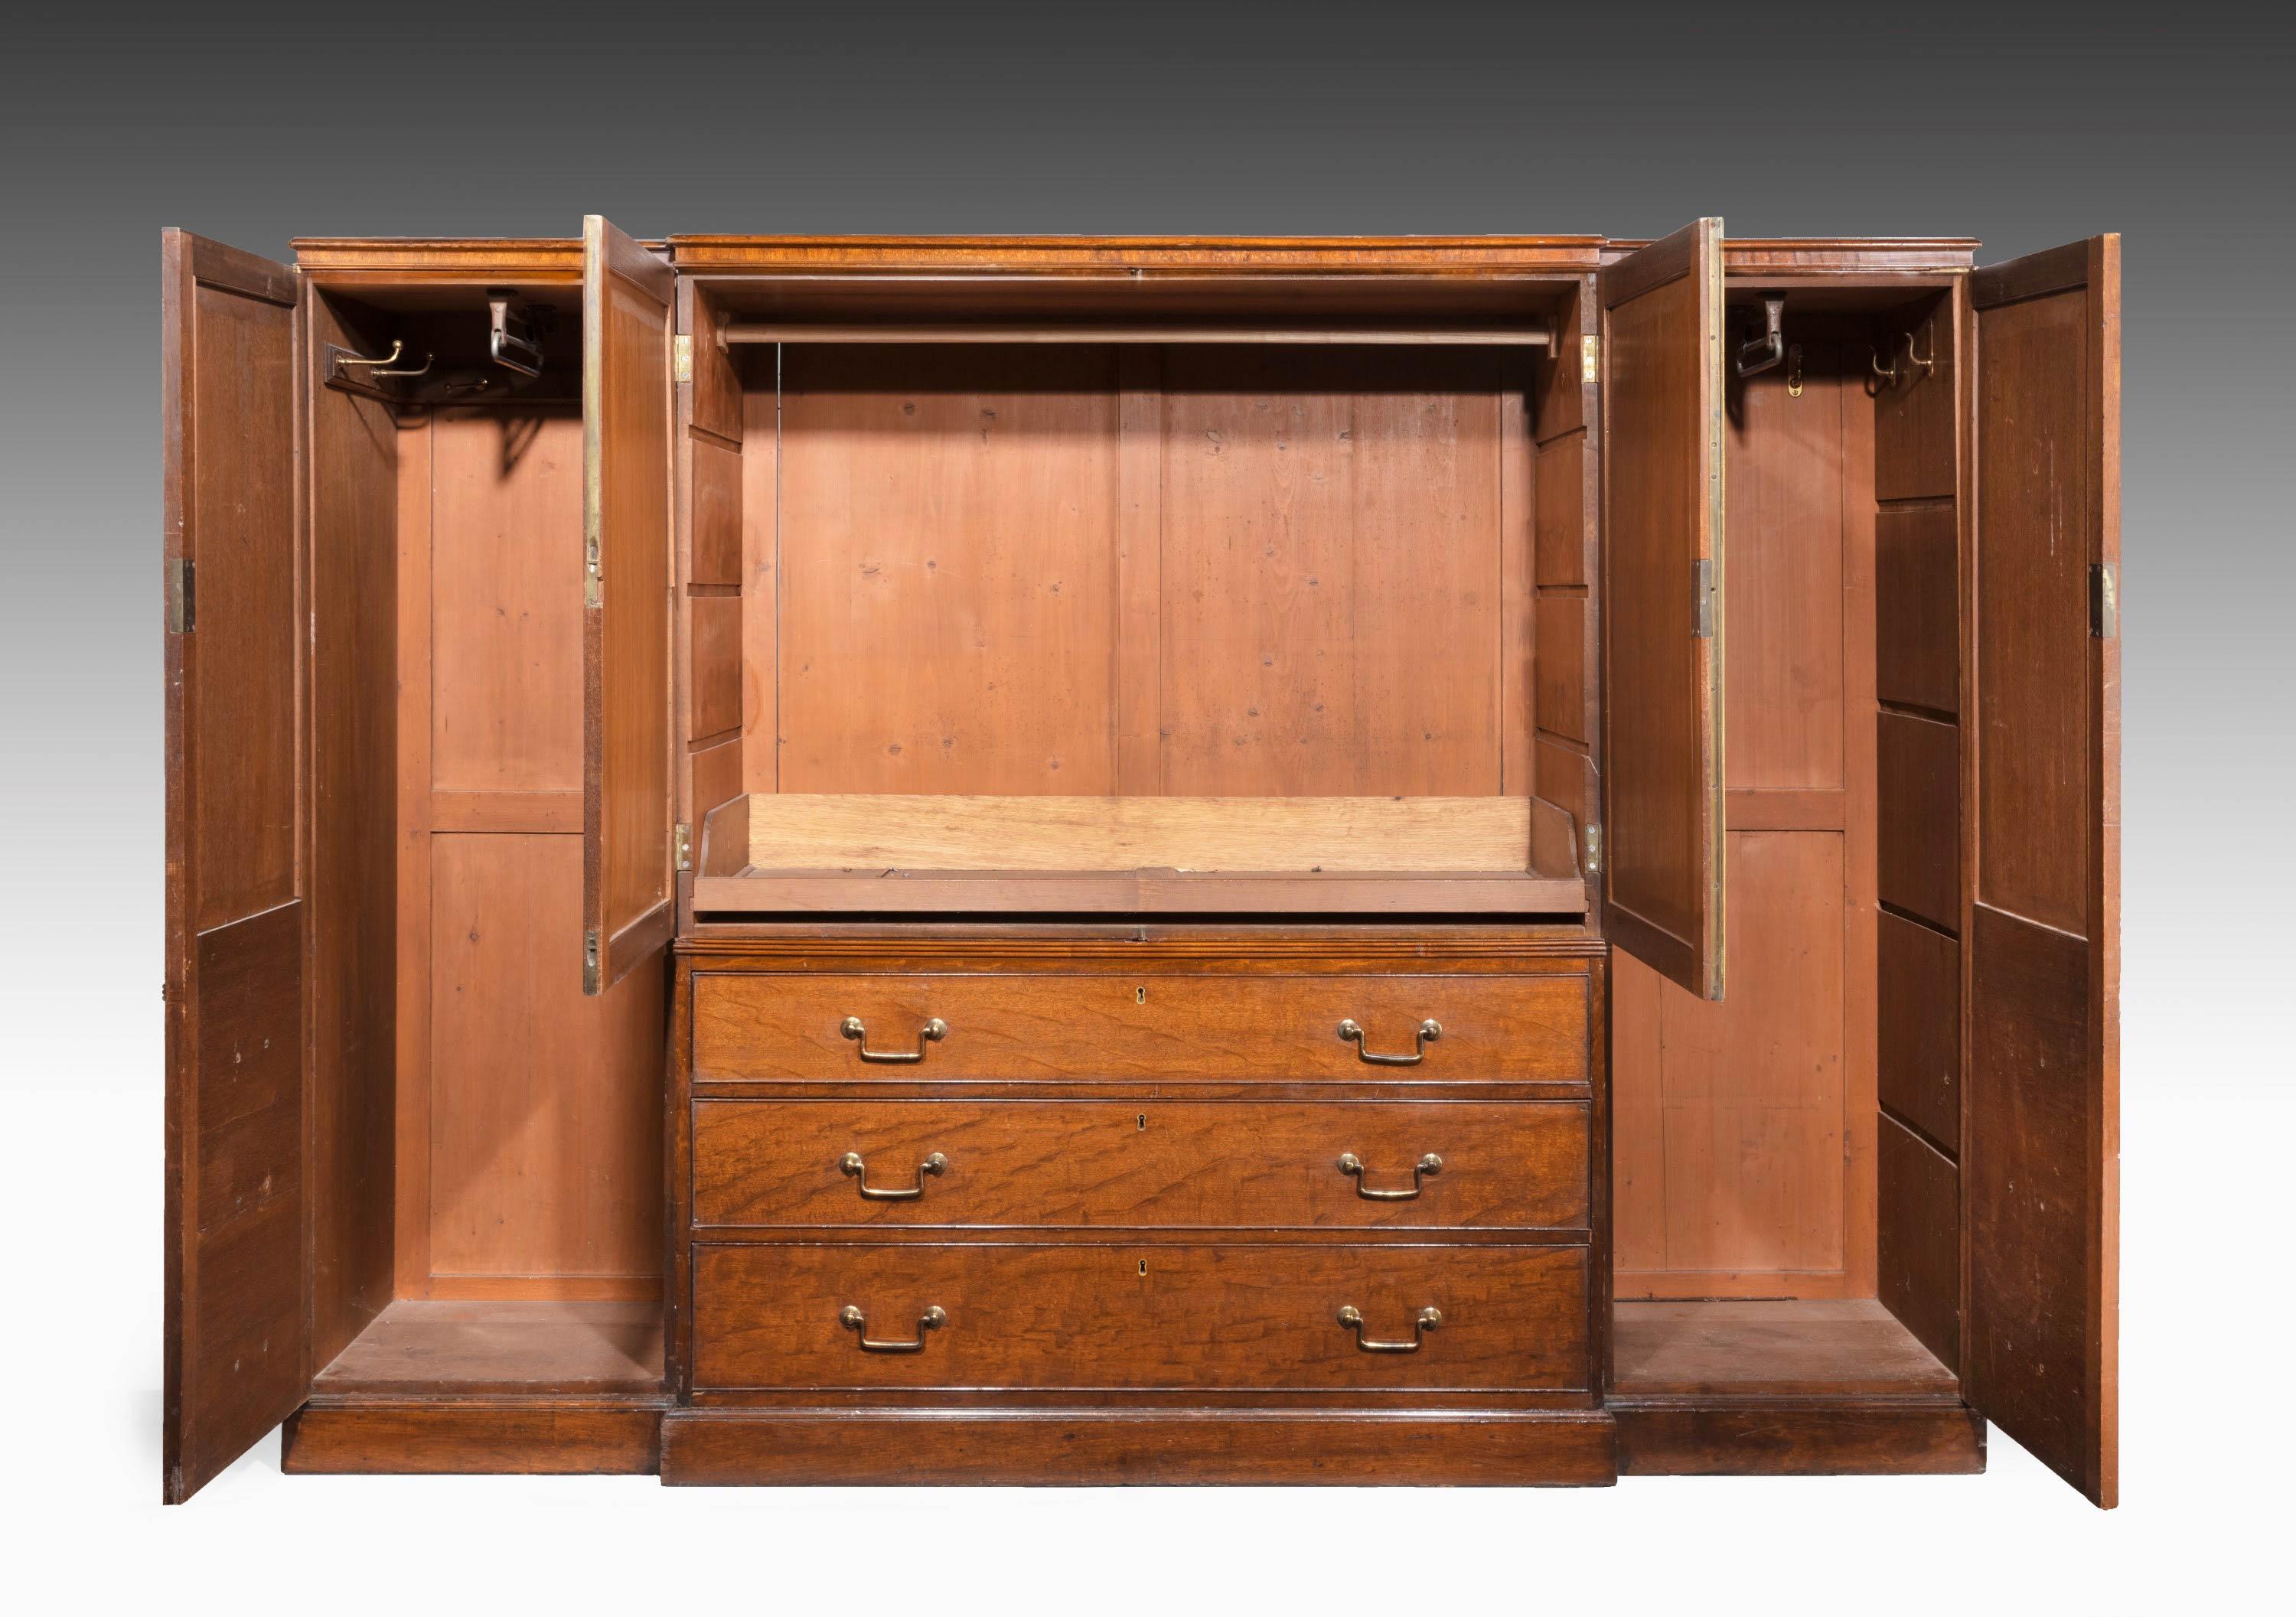 A quite exceptional George III period plum pudding mahogany breakfront wardrobe. With quite exceptional figured timbers matching book leaf left and right-hand side. Square section period handles retaining the original gilding. Unusually tight